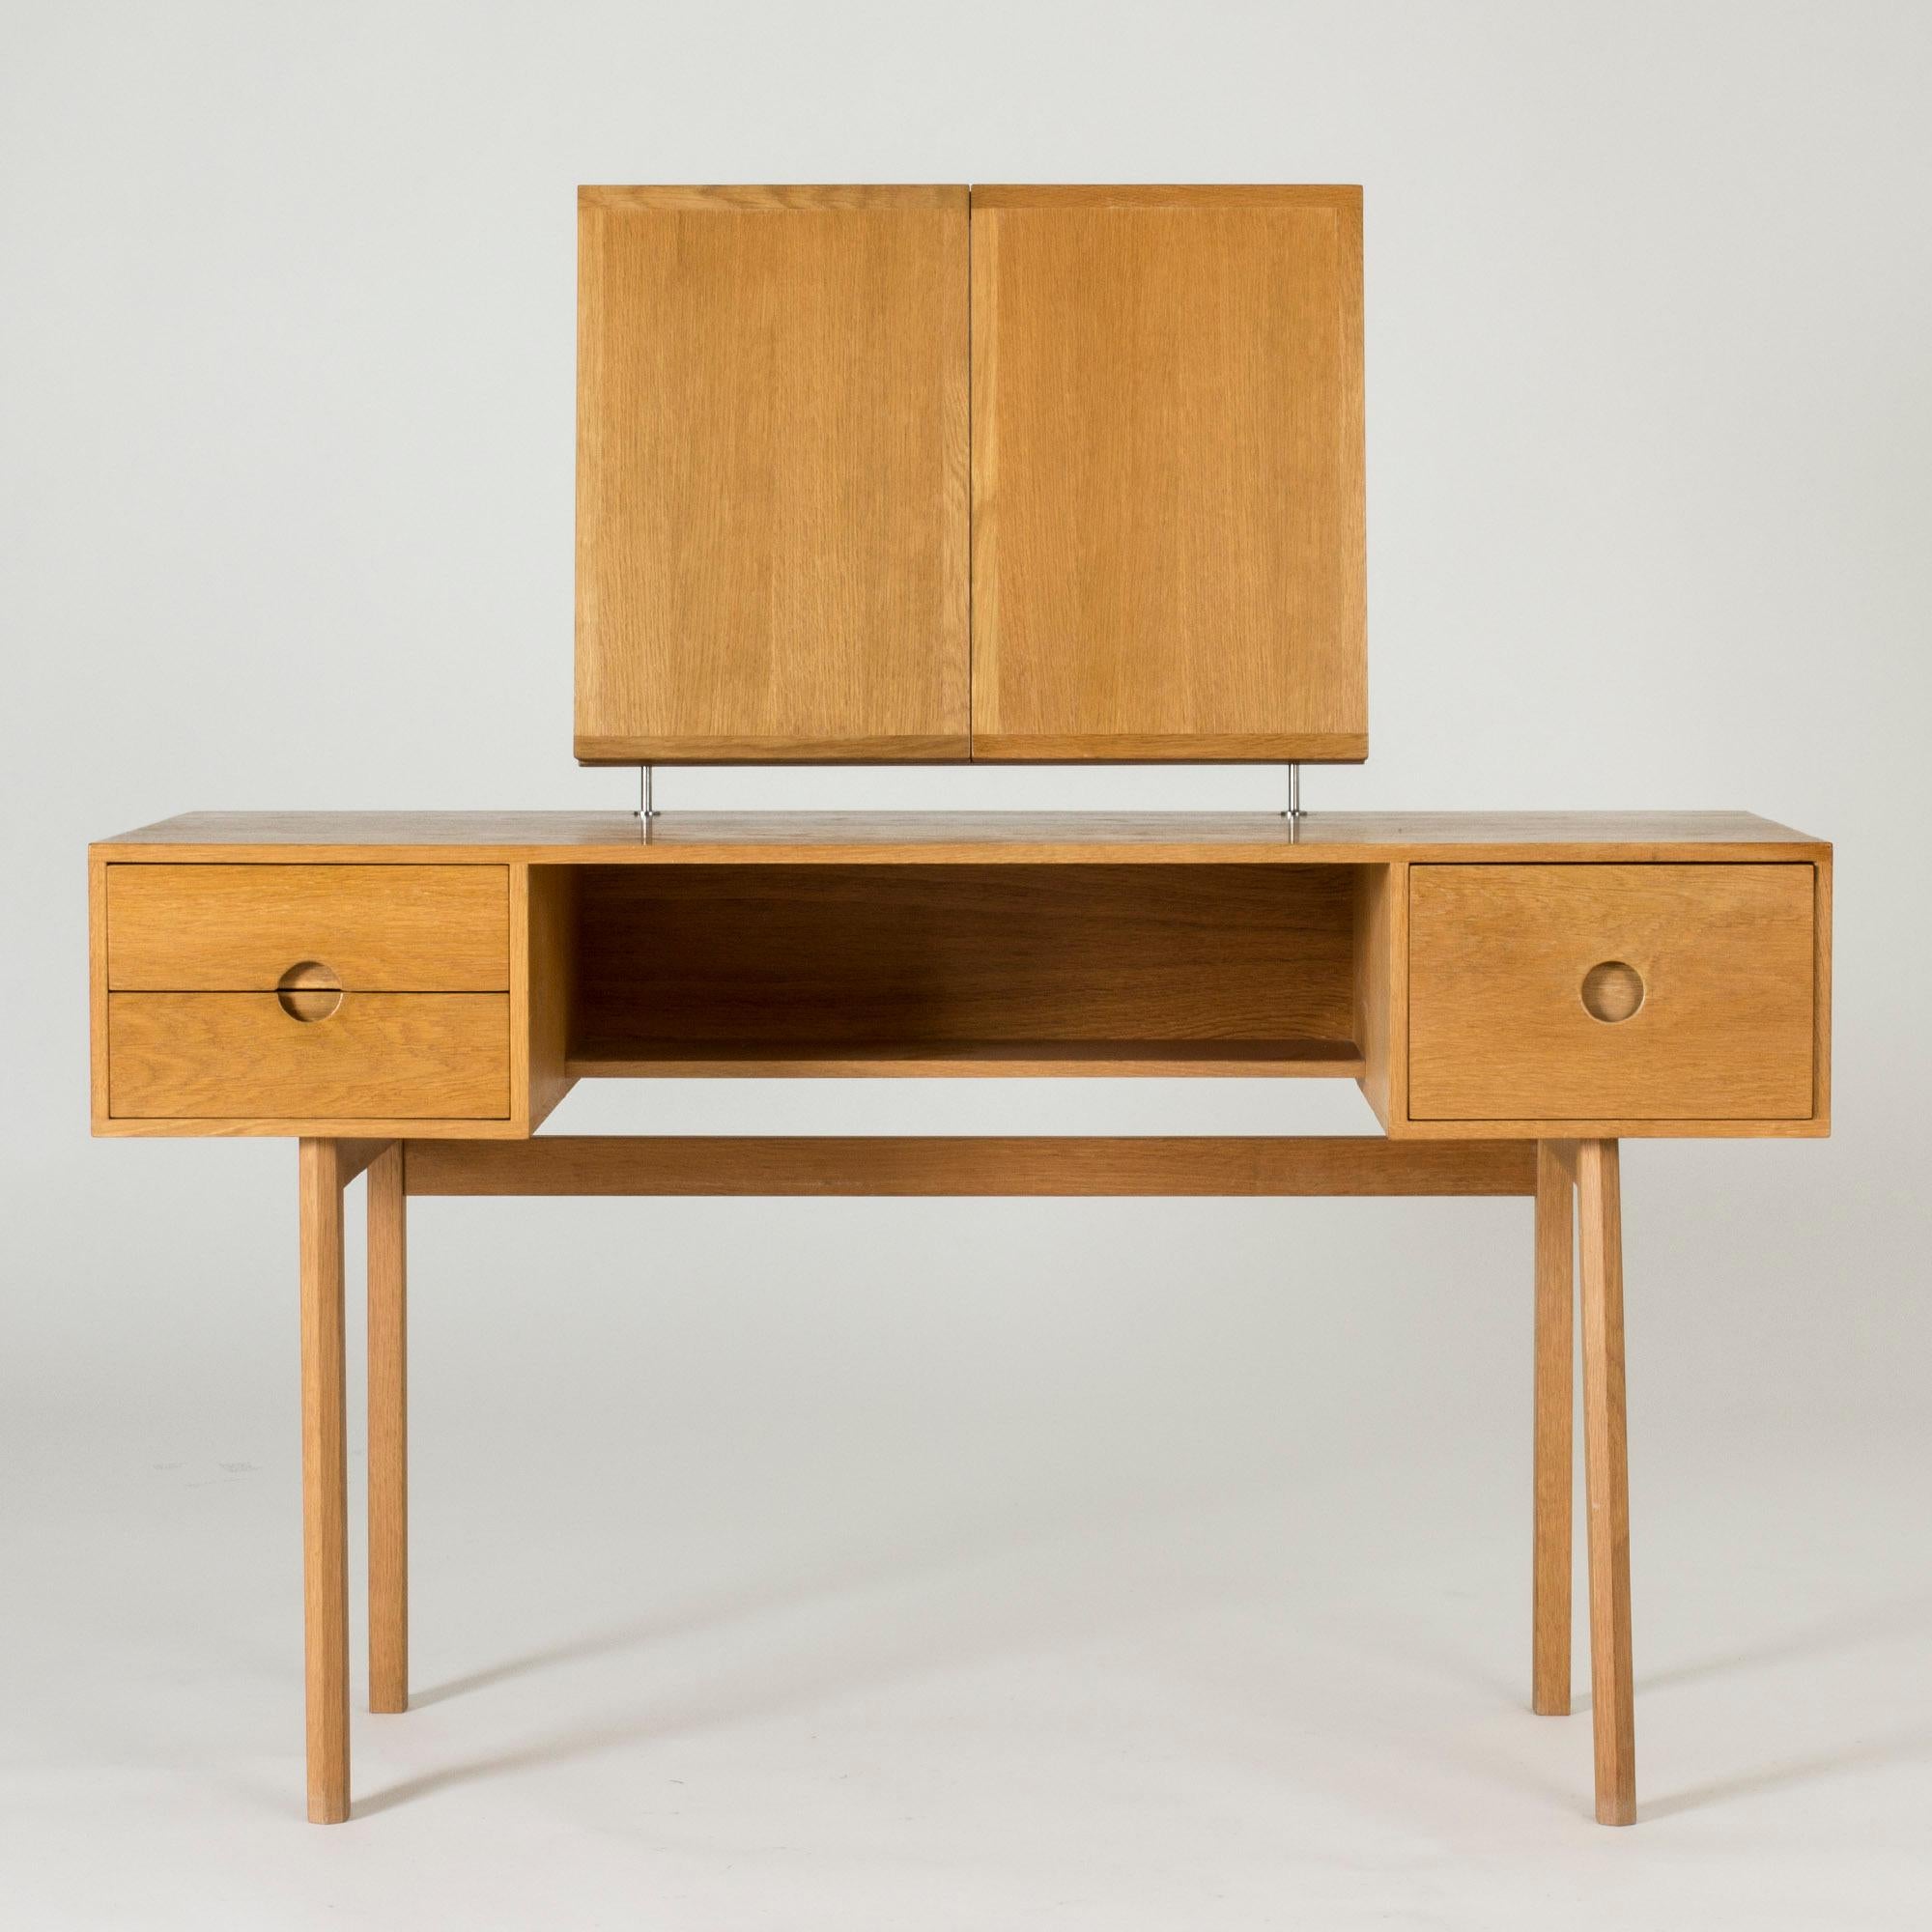 Dressing table by Aksel Kjersgaard, made from oak. Cool, graphic lines. Mirror with three sections, foldable. Nice, round sculpted handle drawers.